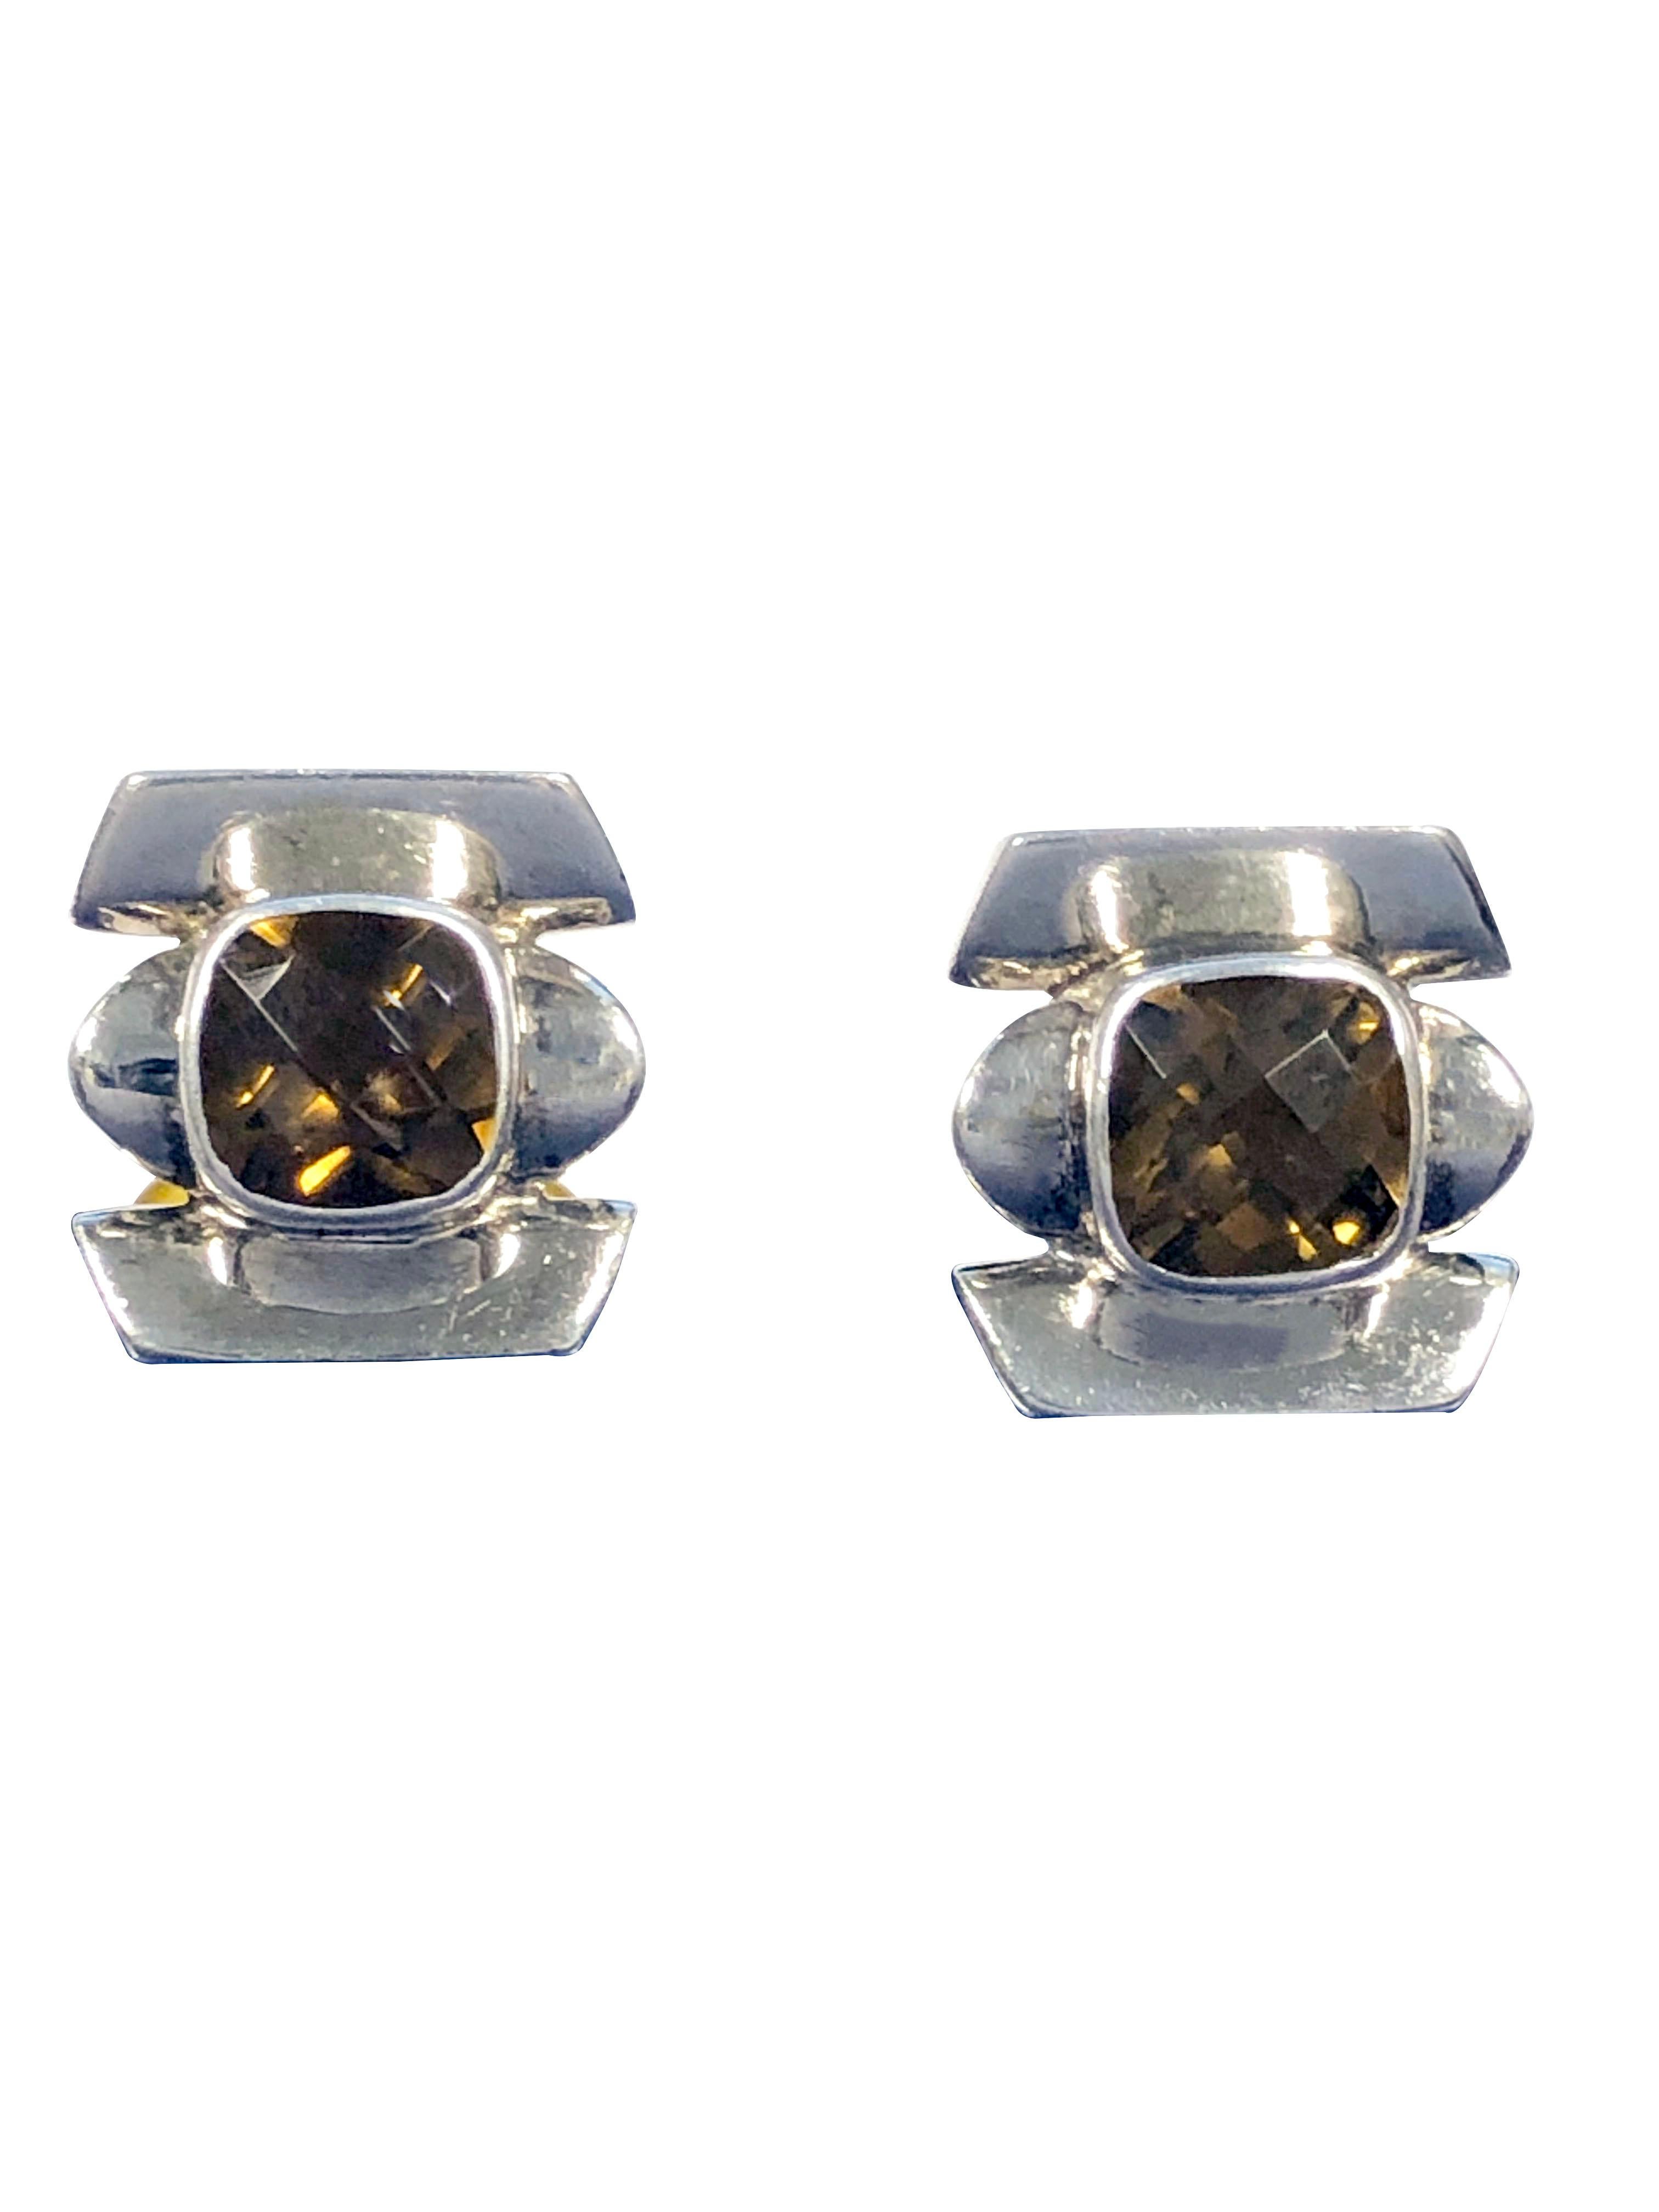 Circa 2018 Sterling Silver Cufflinks by Famed Designer Tracey Mayer, the top measures 3/4 x 7/8 inch and are centrally set with Cushion shape cross faceted Citrine, the toggle backs are set at the end with a Cabochon Citrine as well. 